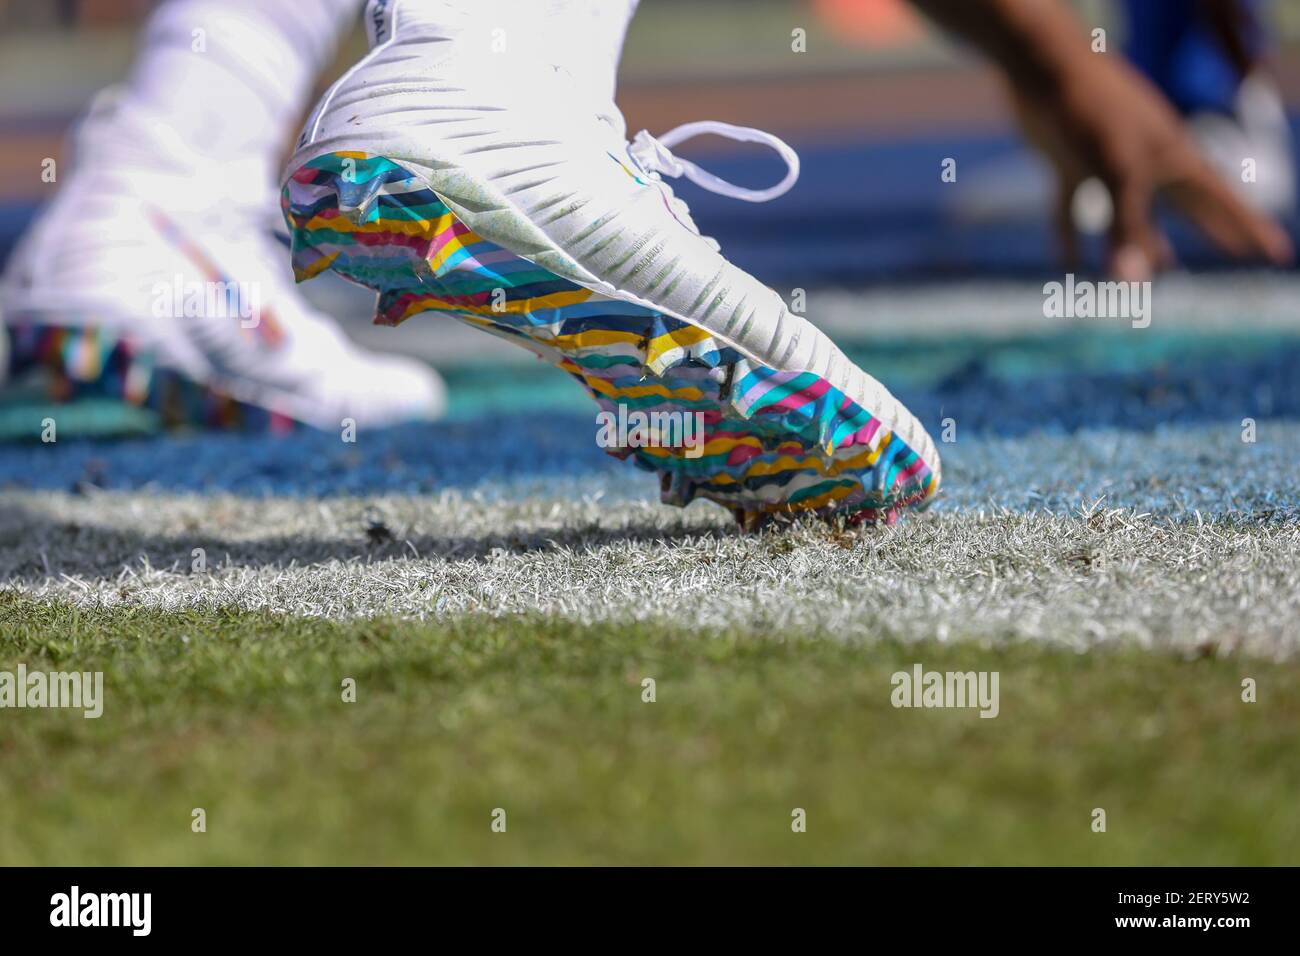 October 28, 2018 Los Angeles, CA...Nike Crucial Catch Cleats for the NFL  Green Bay Packers vs Los Angeles Rams at the Los Angeles Memorial Coliseum  in Los Angeles, Ca on October 28,